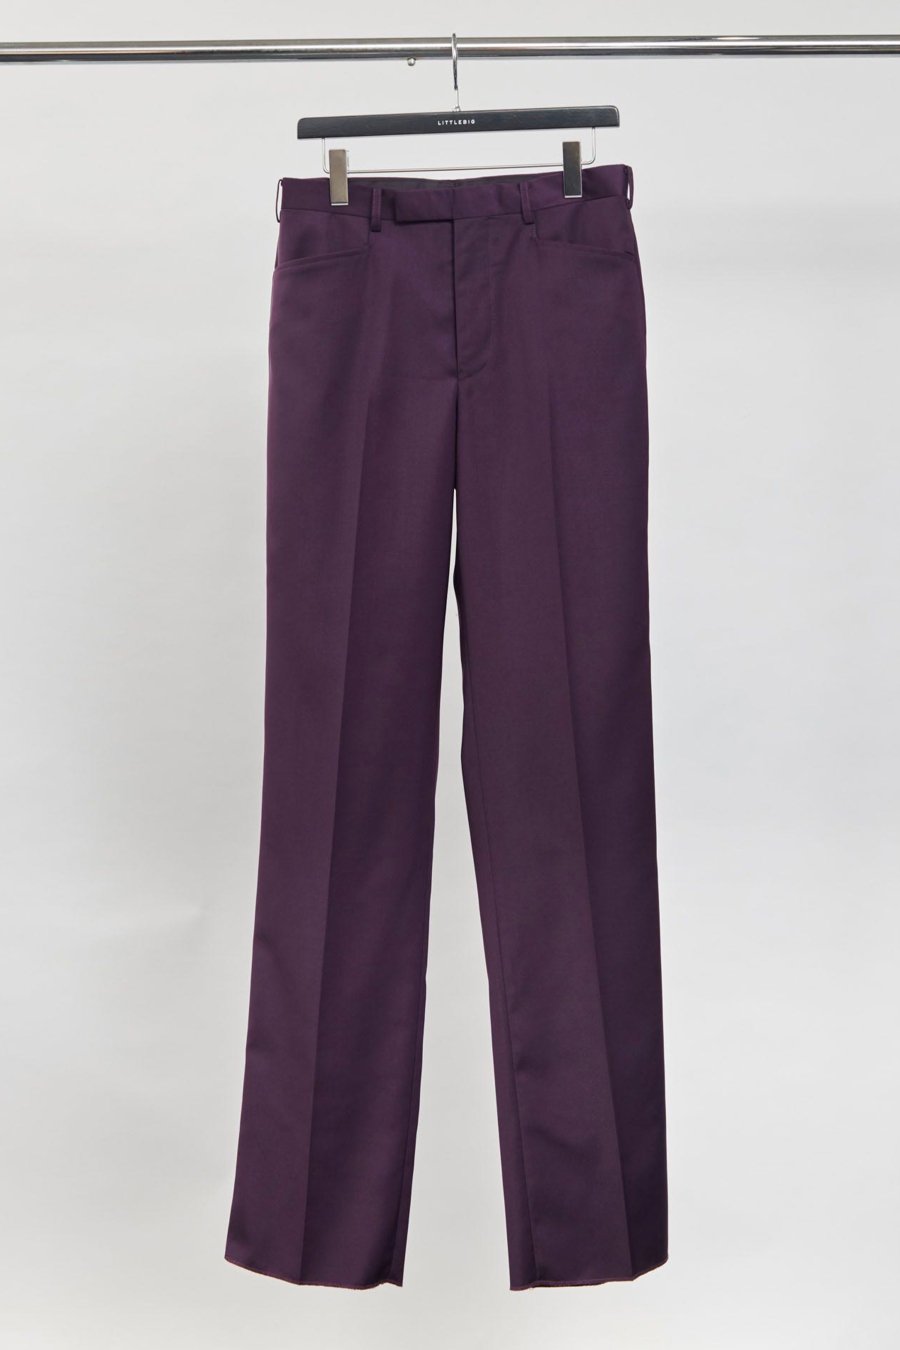 LITTLEBIG  Purple Straight Trousers<img class='new_mark_img2' src='https://img.shop-pro.jp/img/new/icons15.gif' style='border:none;display:inline;margin:0px;padding:0px;width:auto;' />